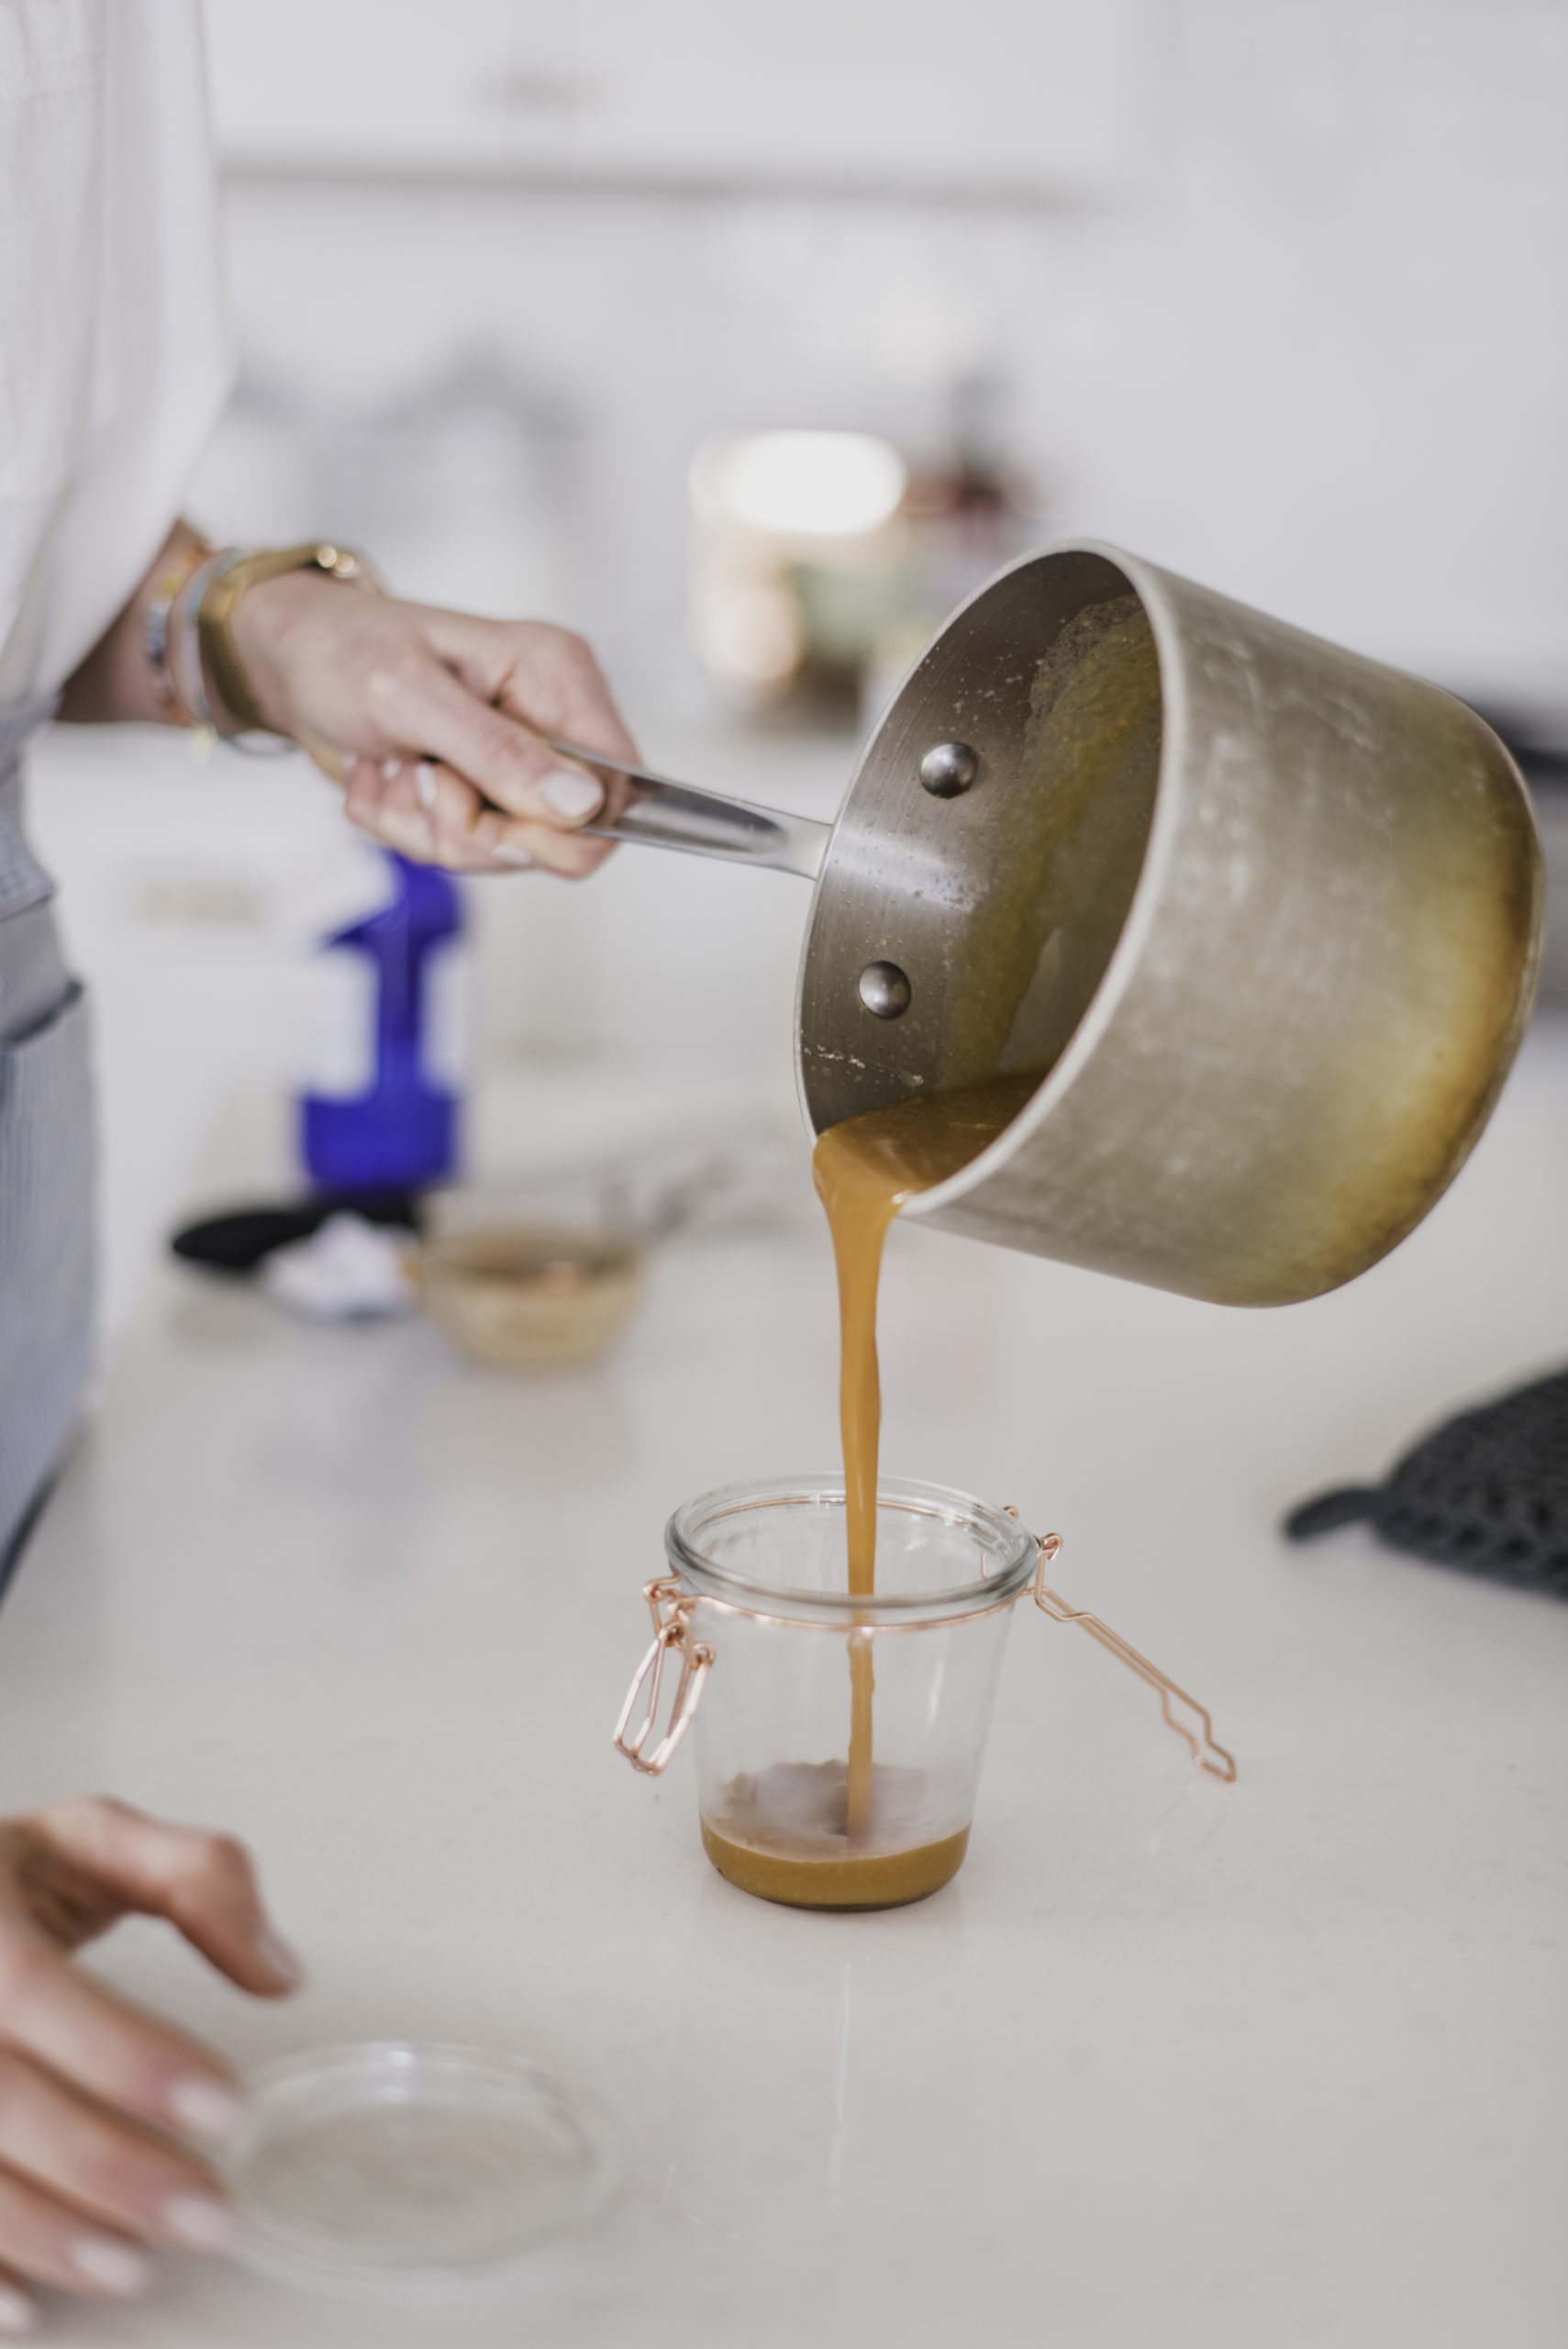 Homemade Salted Caramel being poured into a glass.